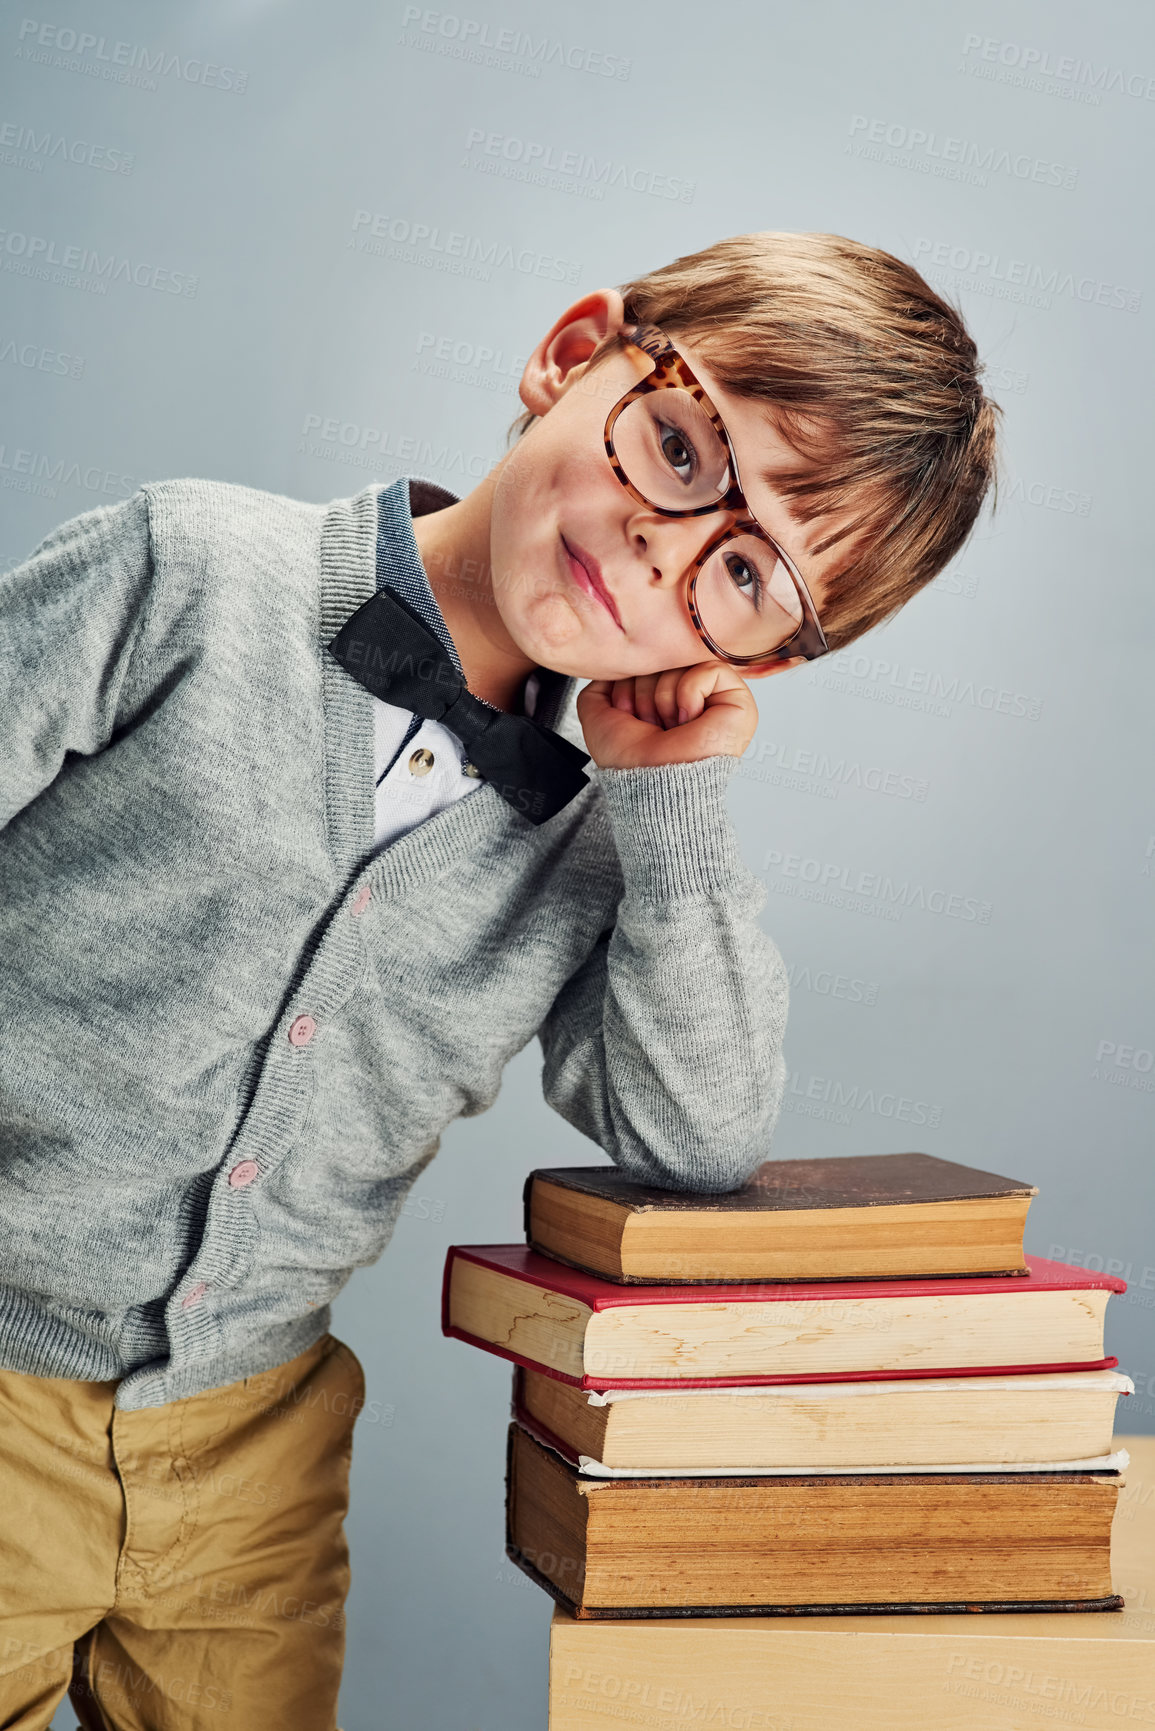 Buy stock photo Studio portrait of a smart little boy leaning over a pile of books against a gray background